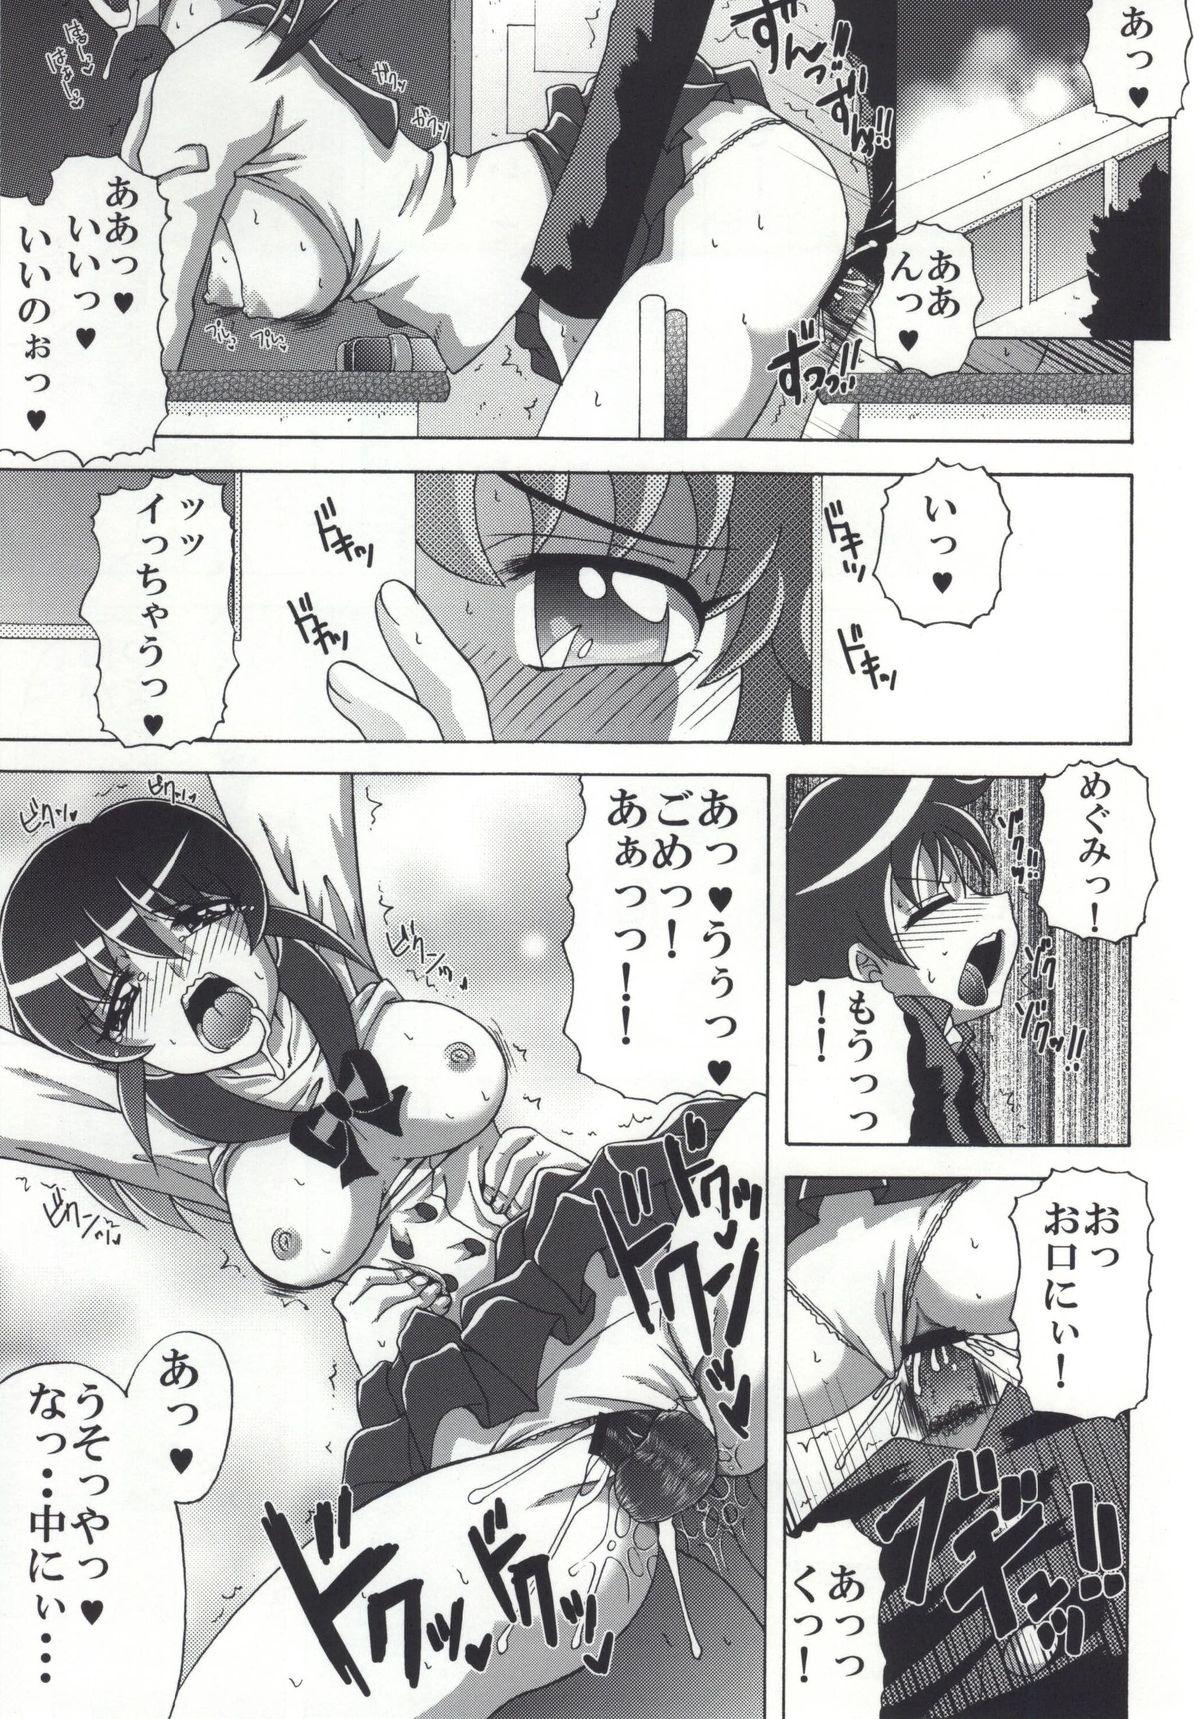 Kinky Hime-chan no Tomodachi - Happinesscharge precure Interracial Sex - Page 2